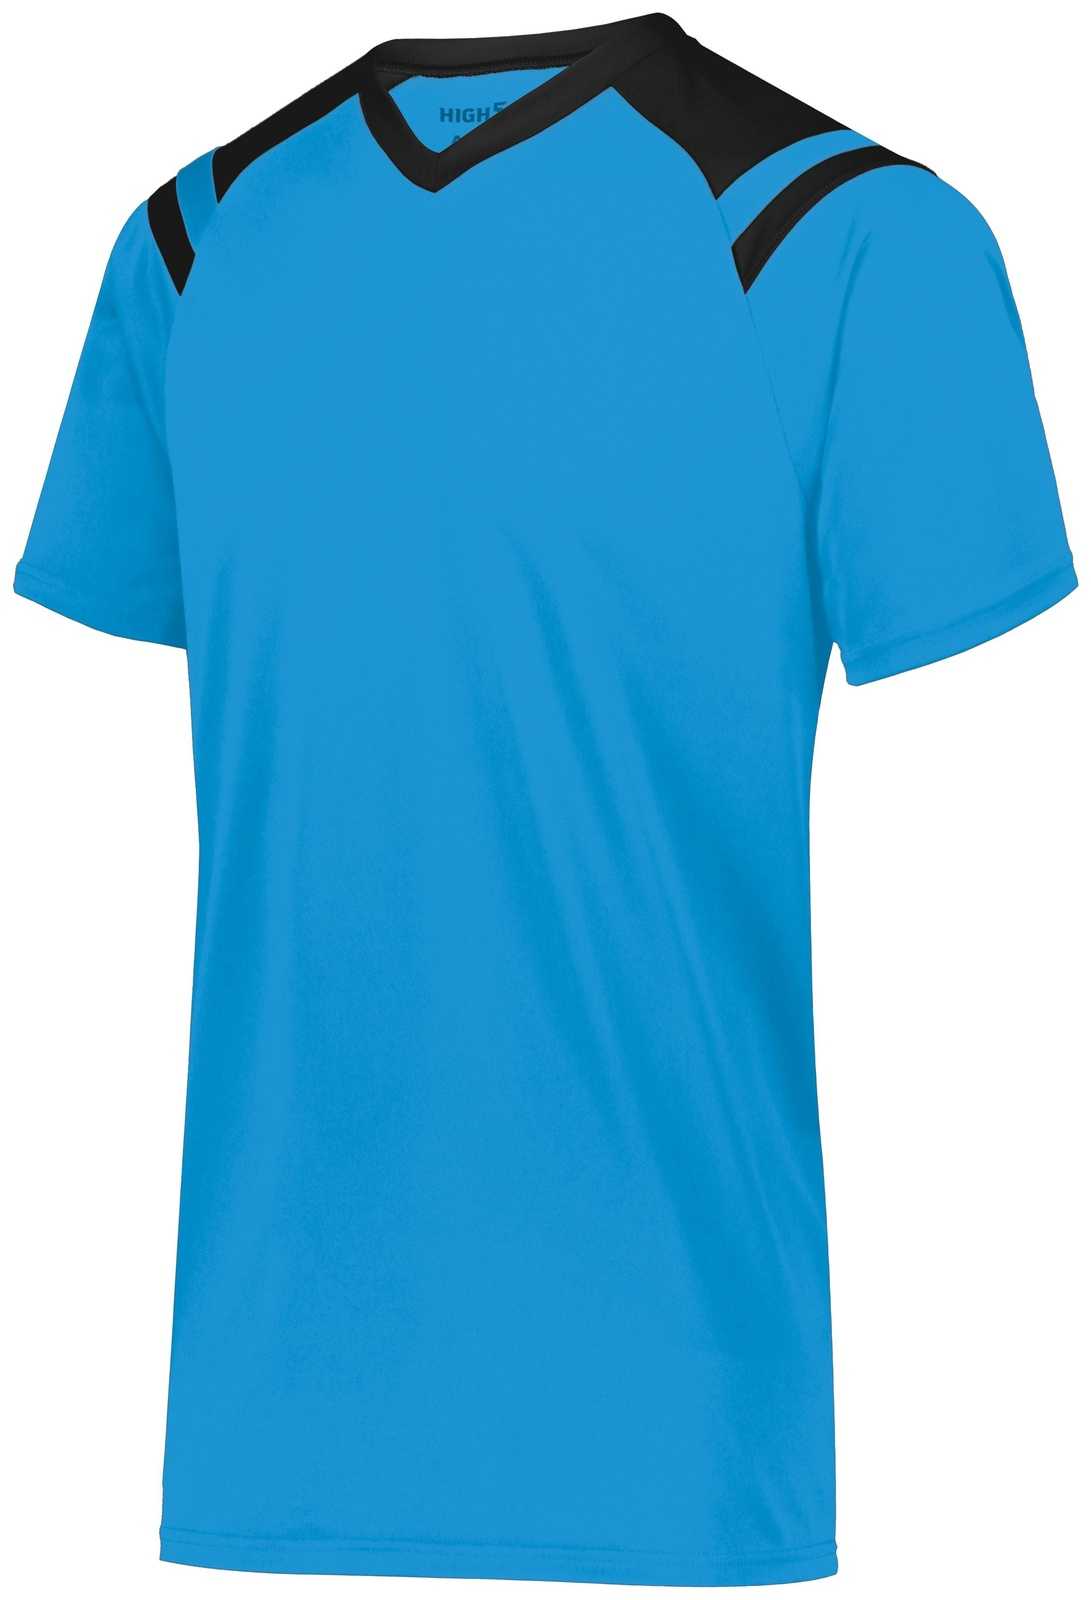 High Five 322971 Youth Sheffield Jersey - Power Blue Black - HIT a Double